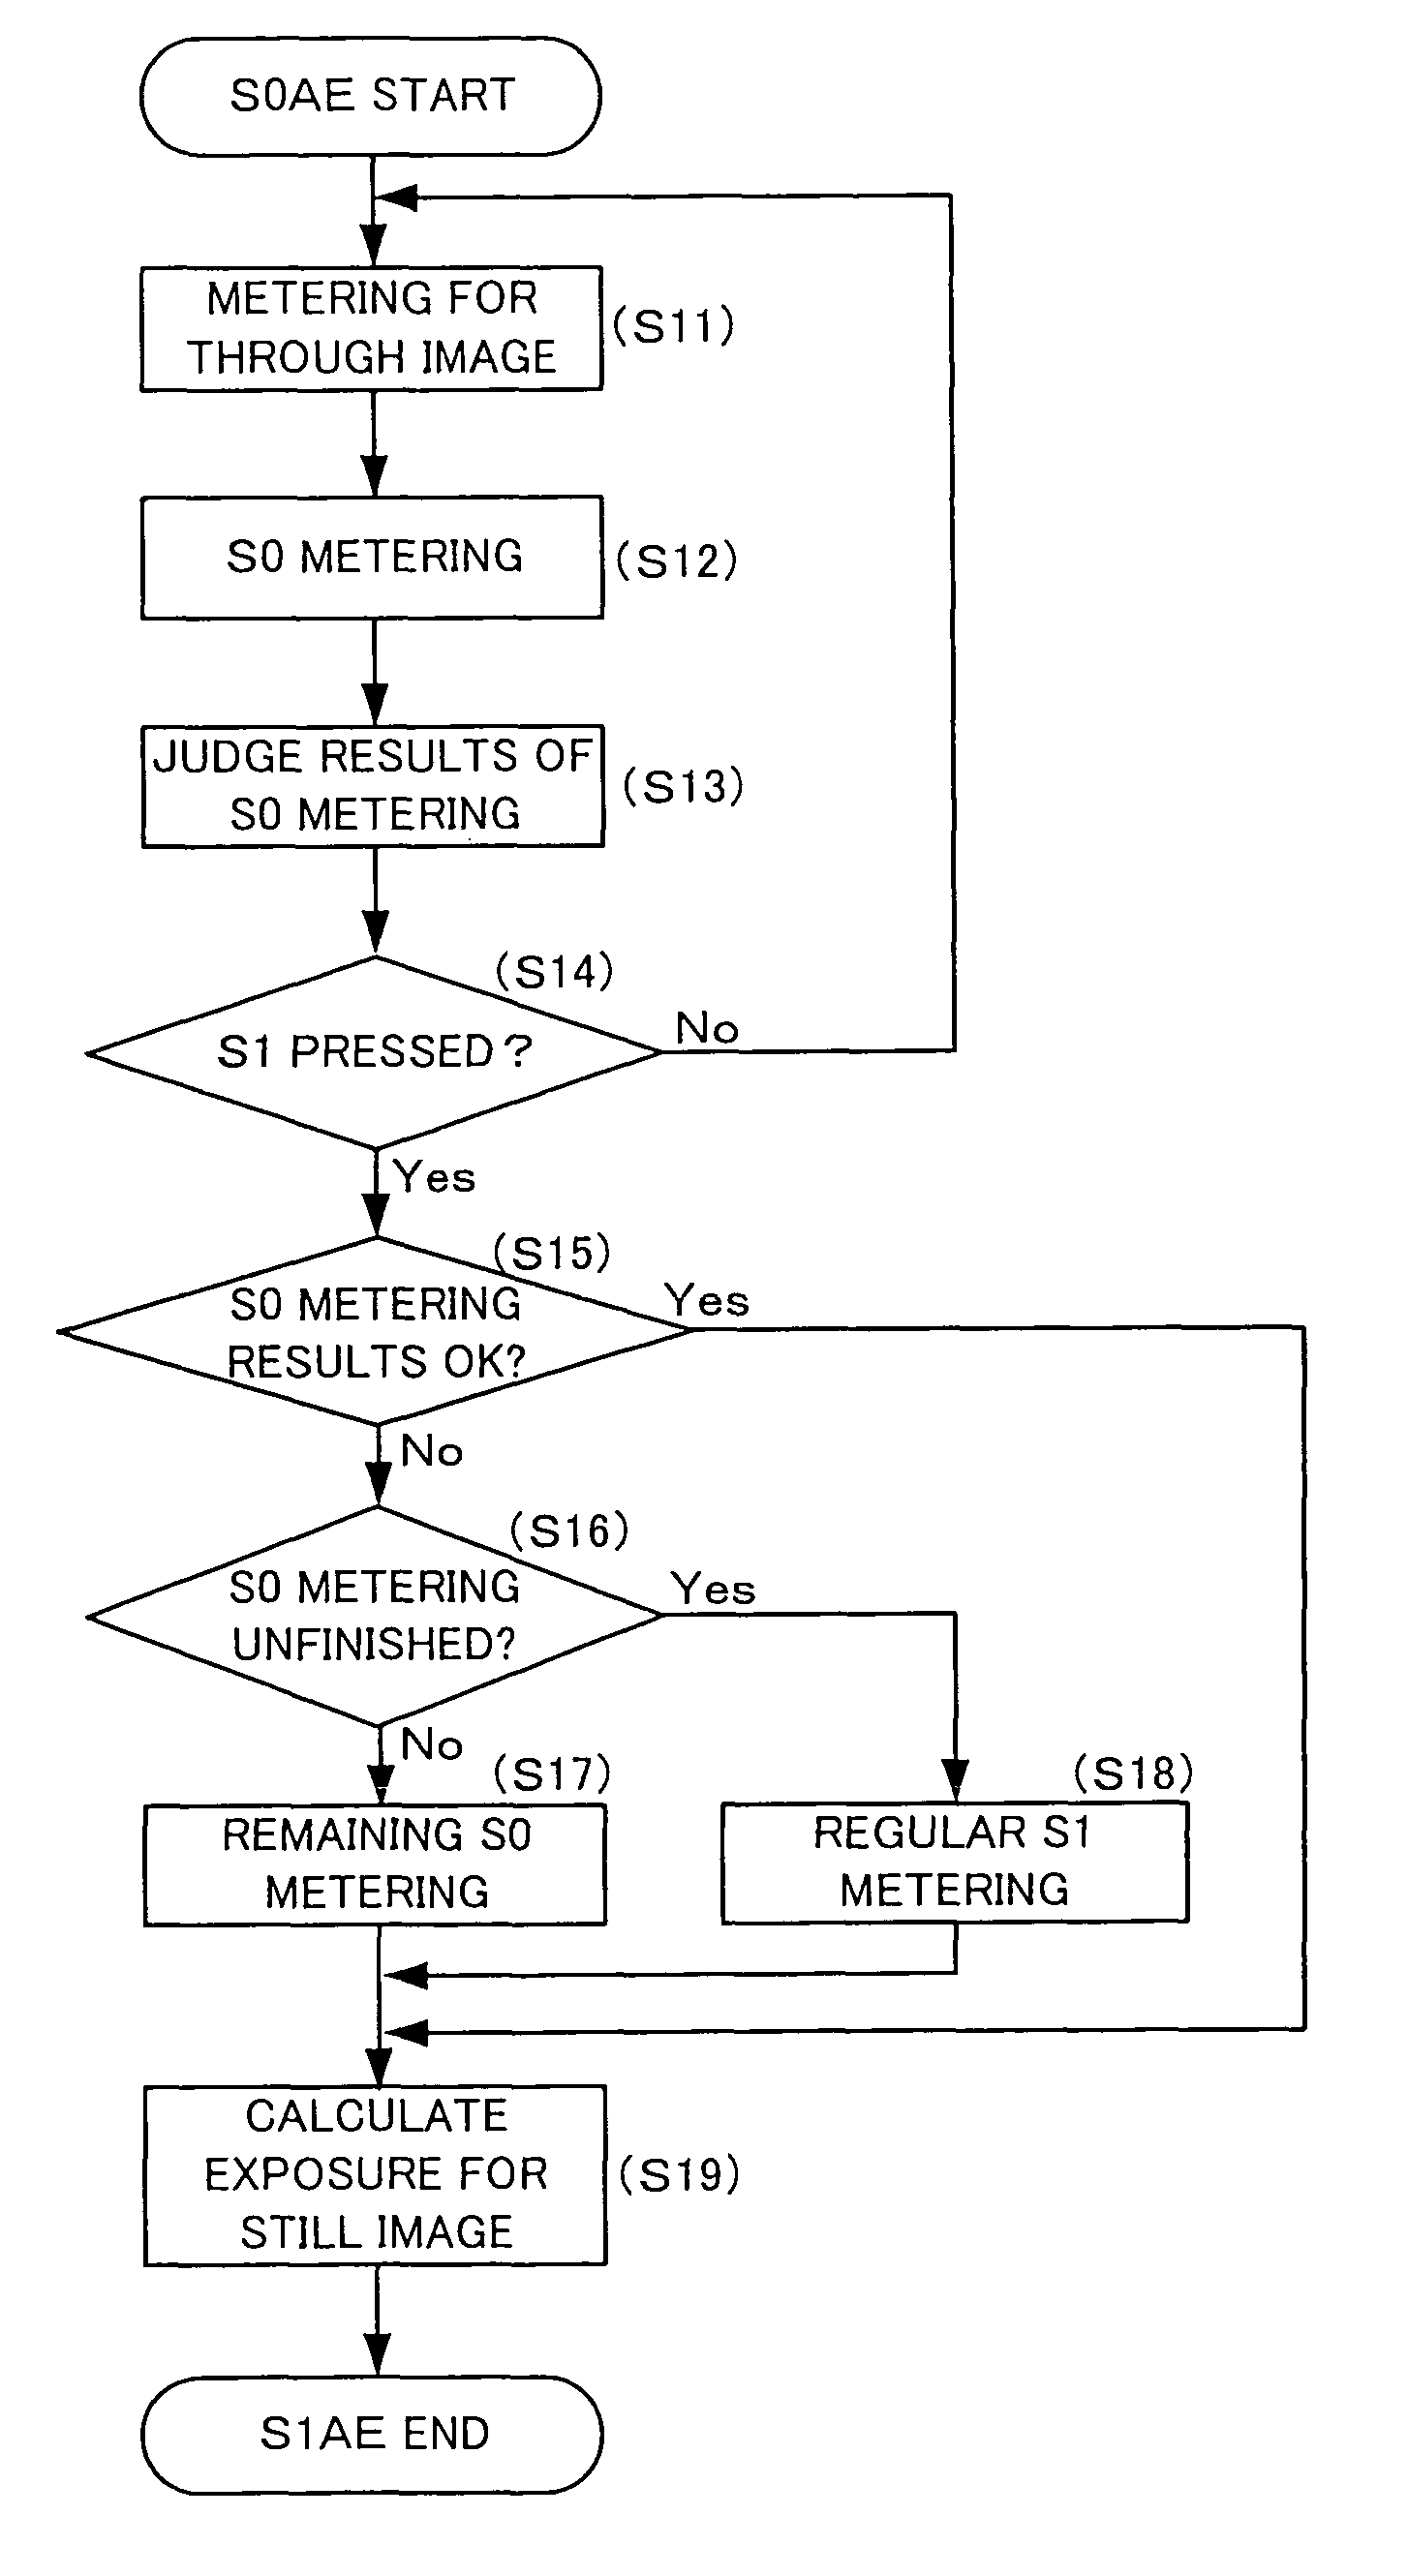 Image-taking apparatus that shoots a still image when a release button is pressed